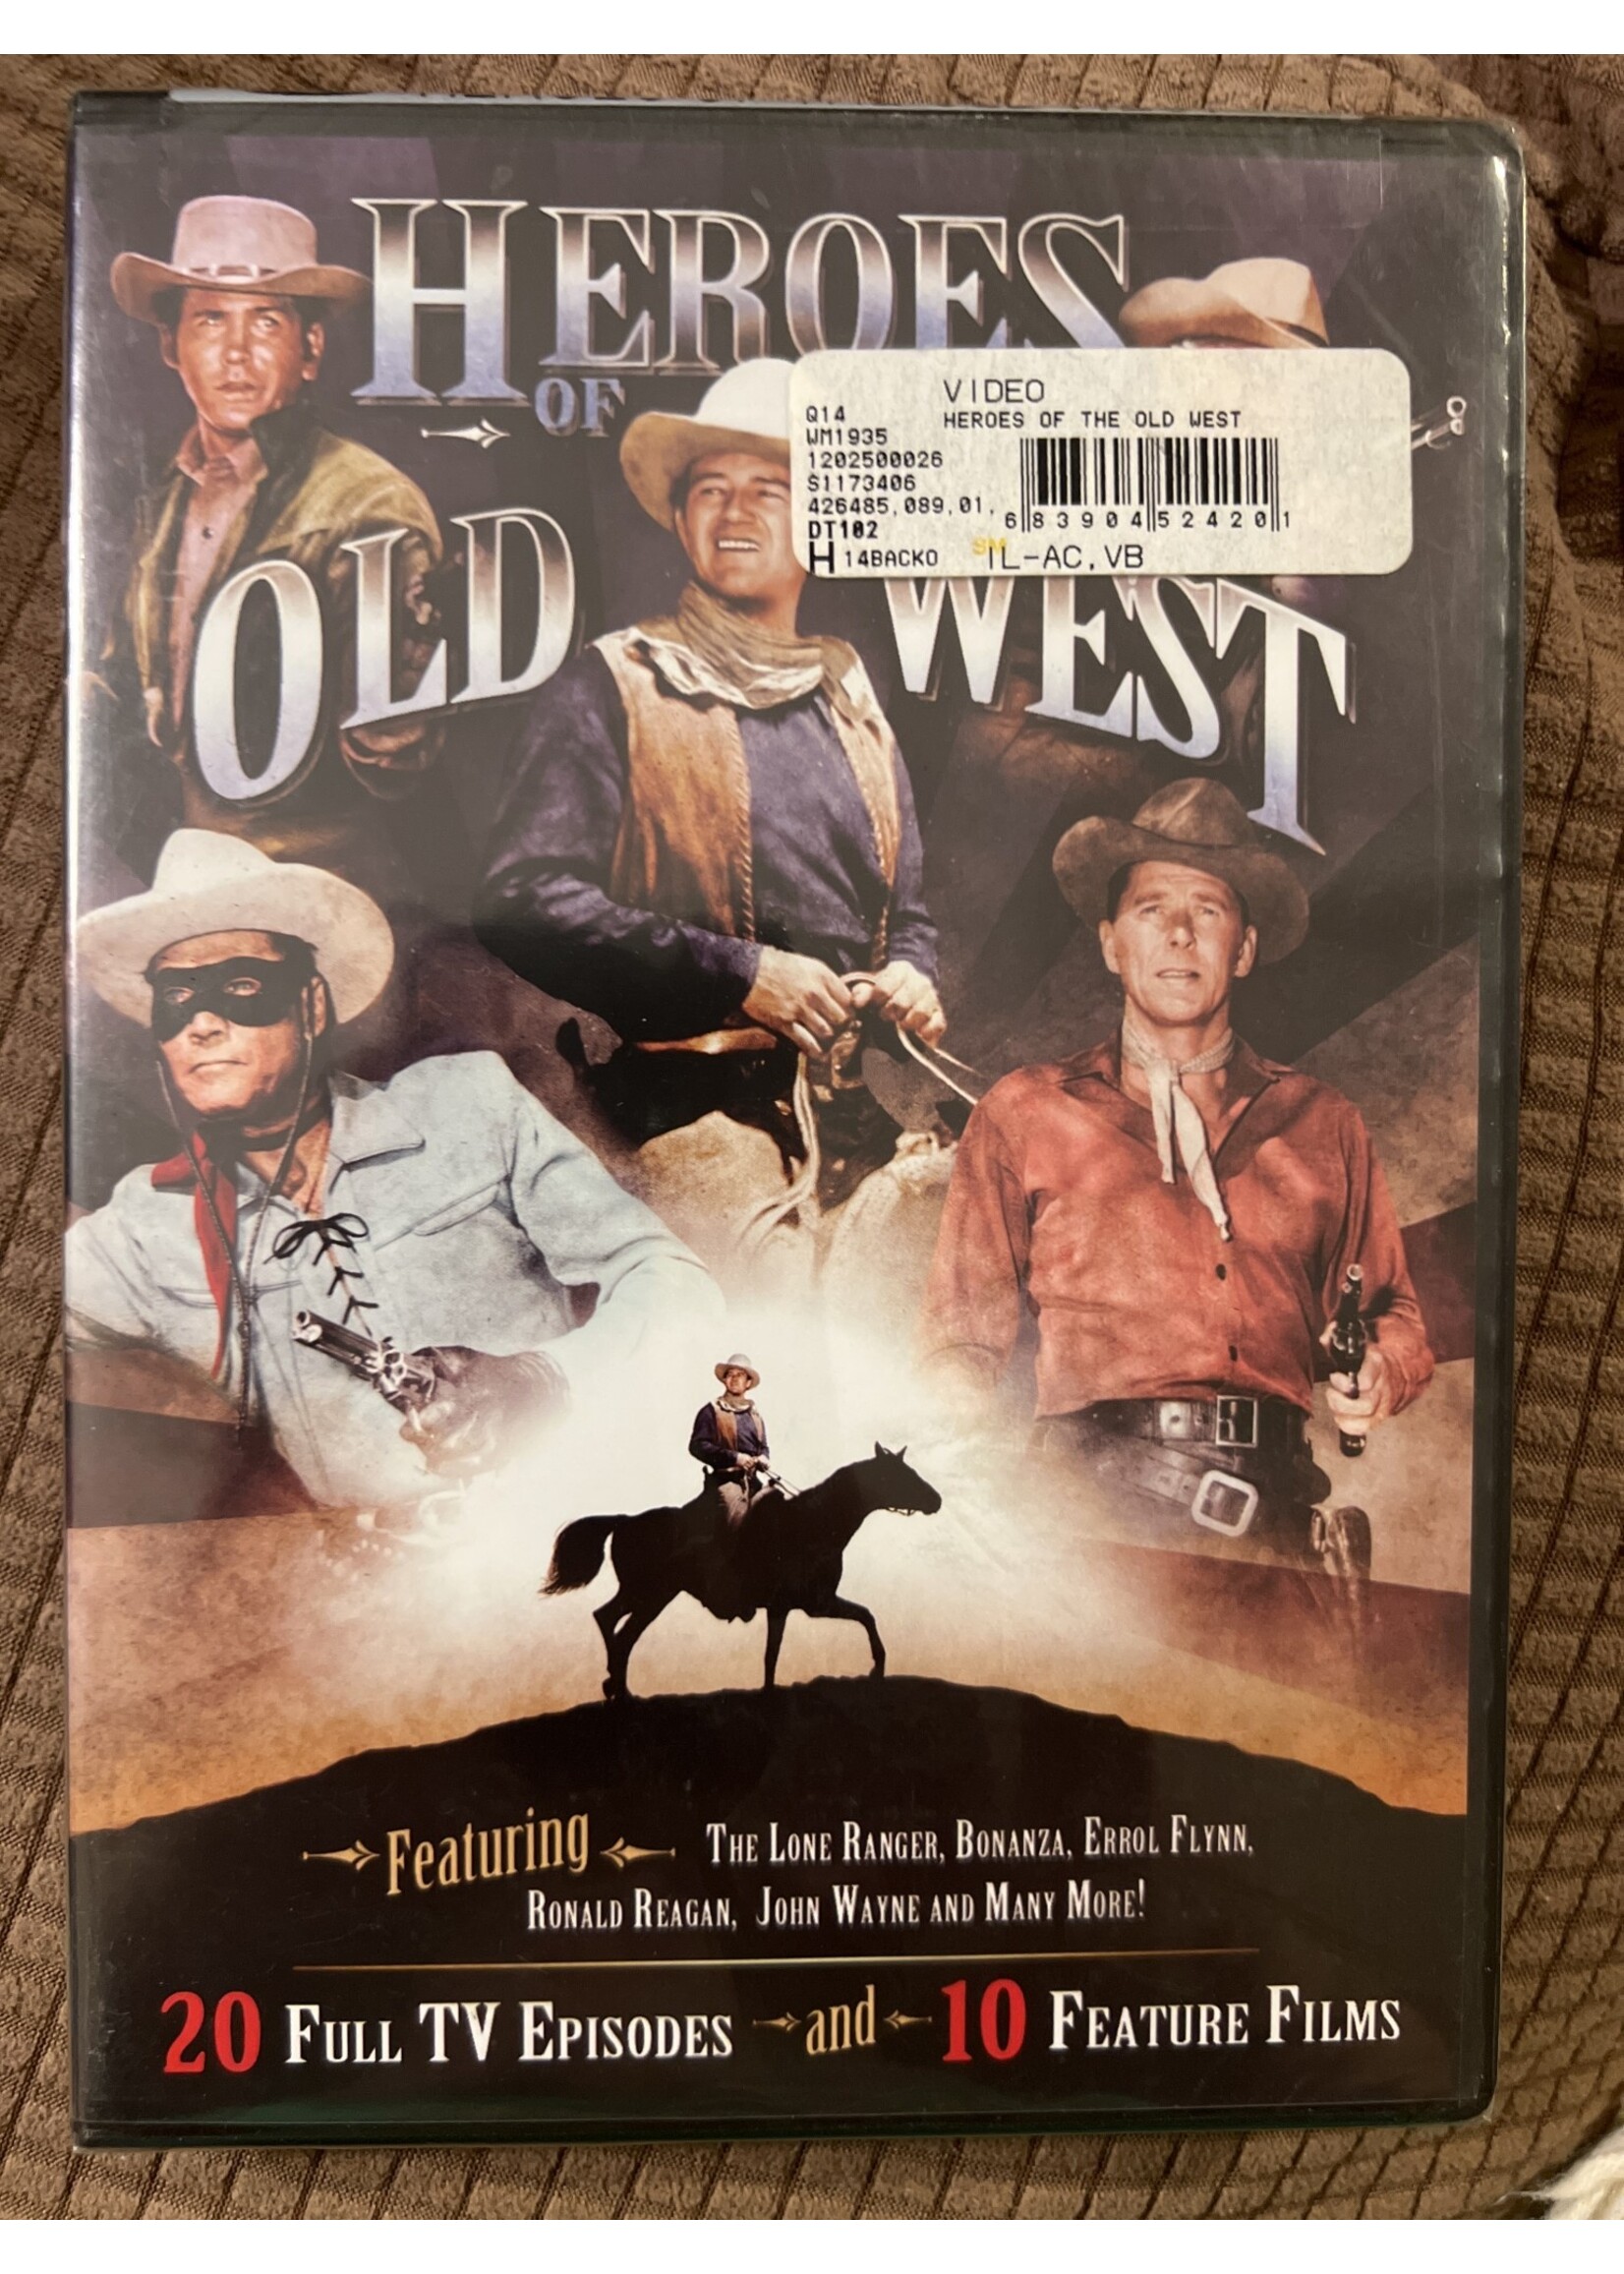 Unopened -Heroes of the Old West   DVD